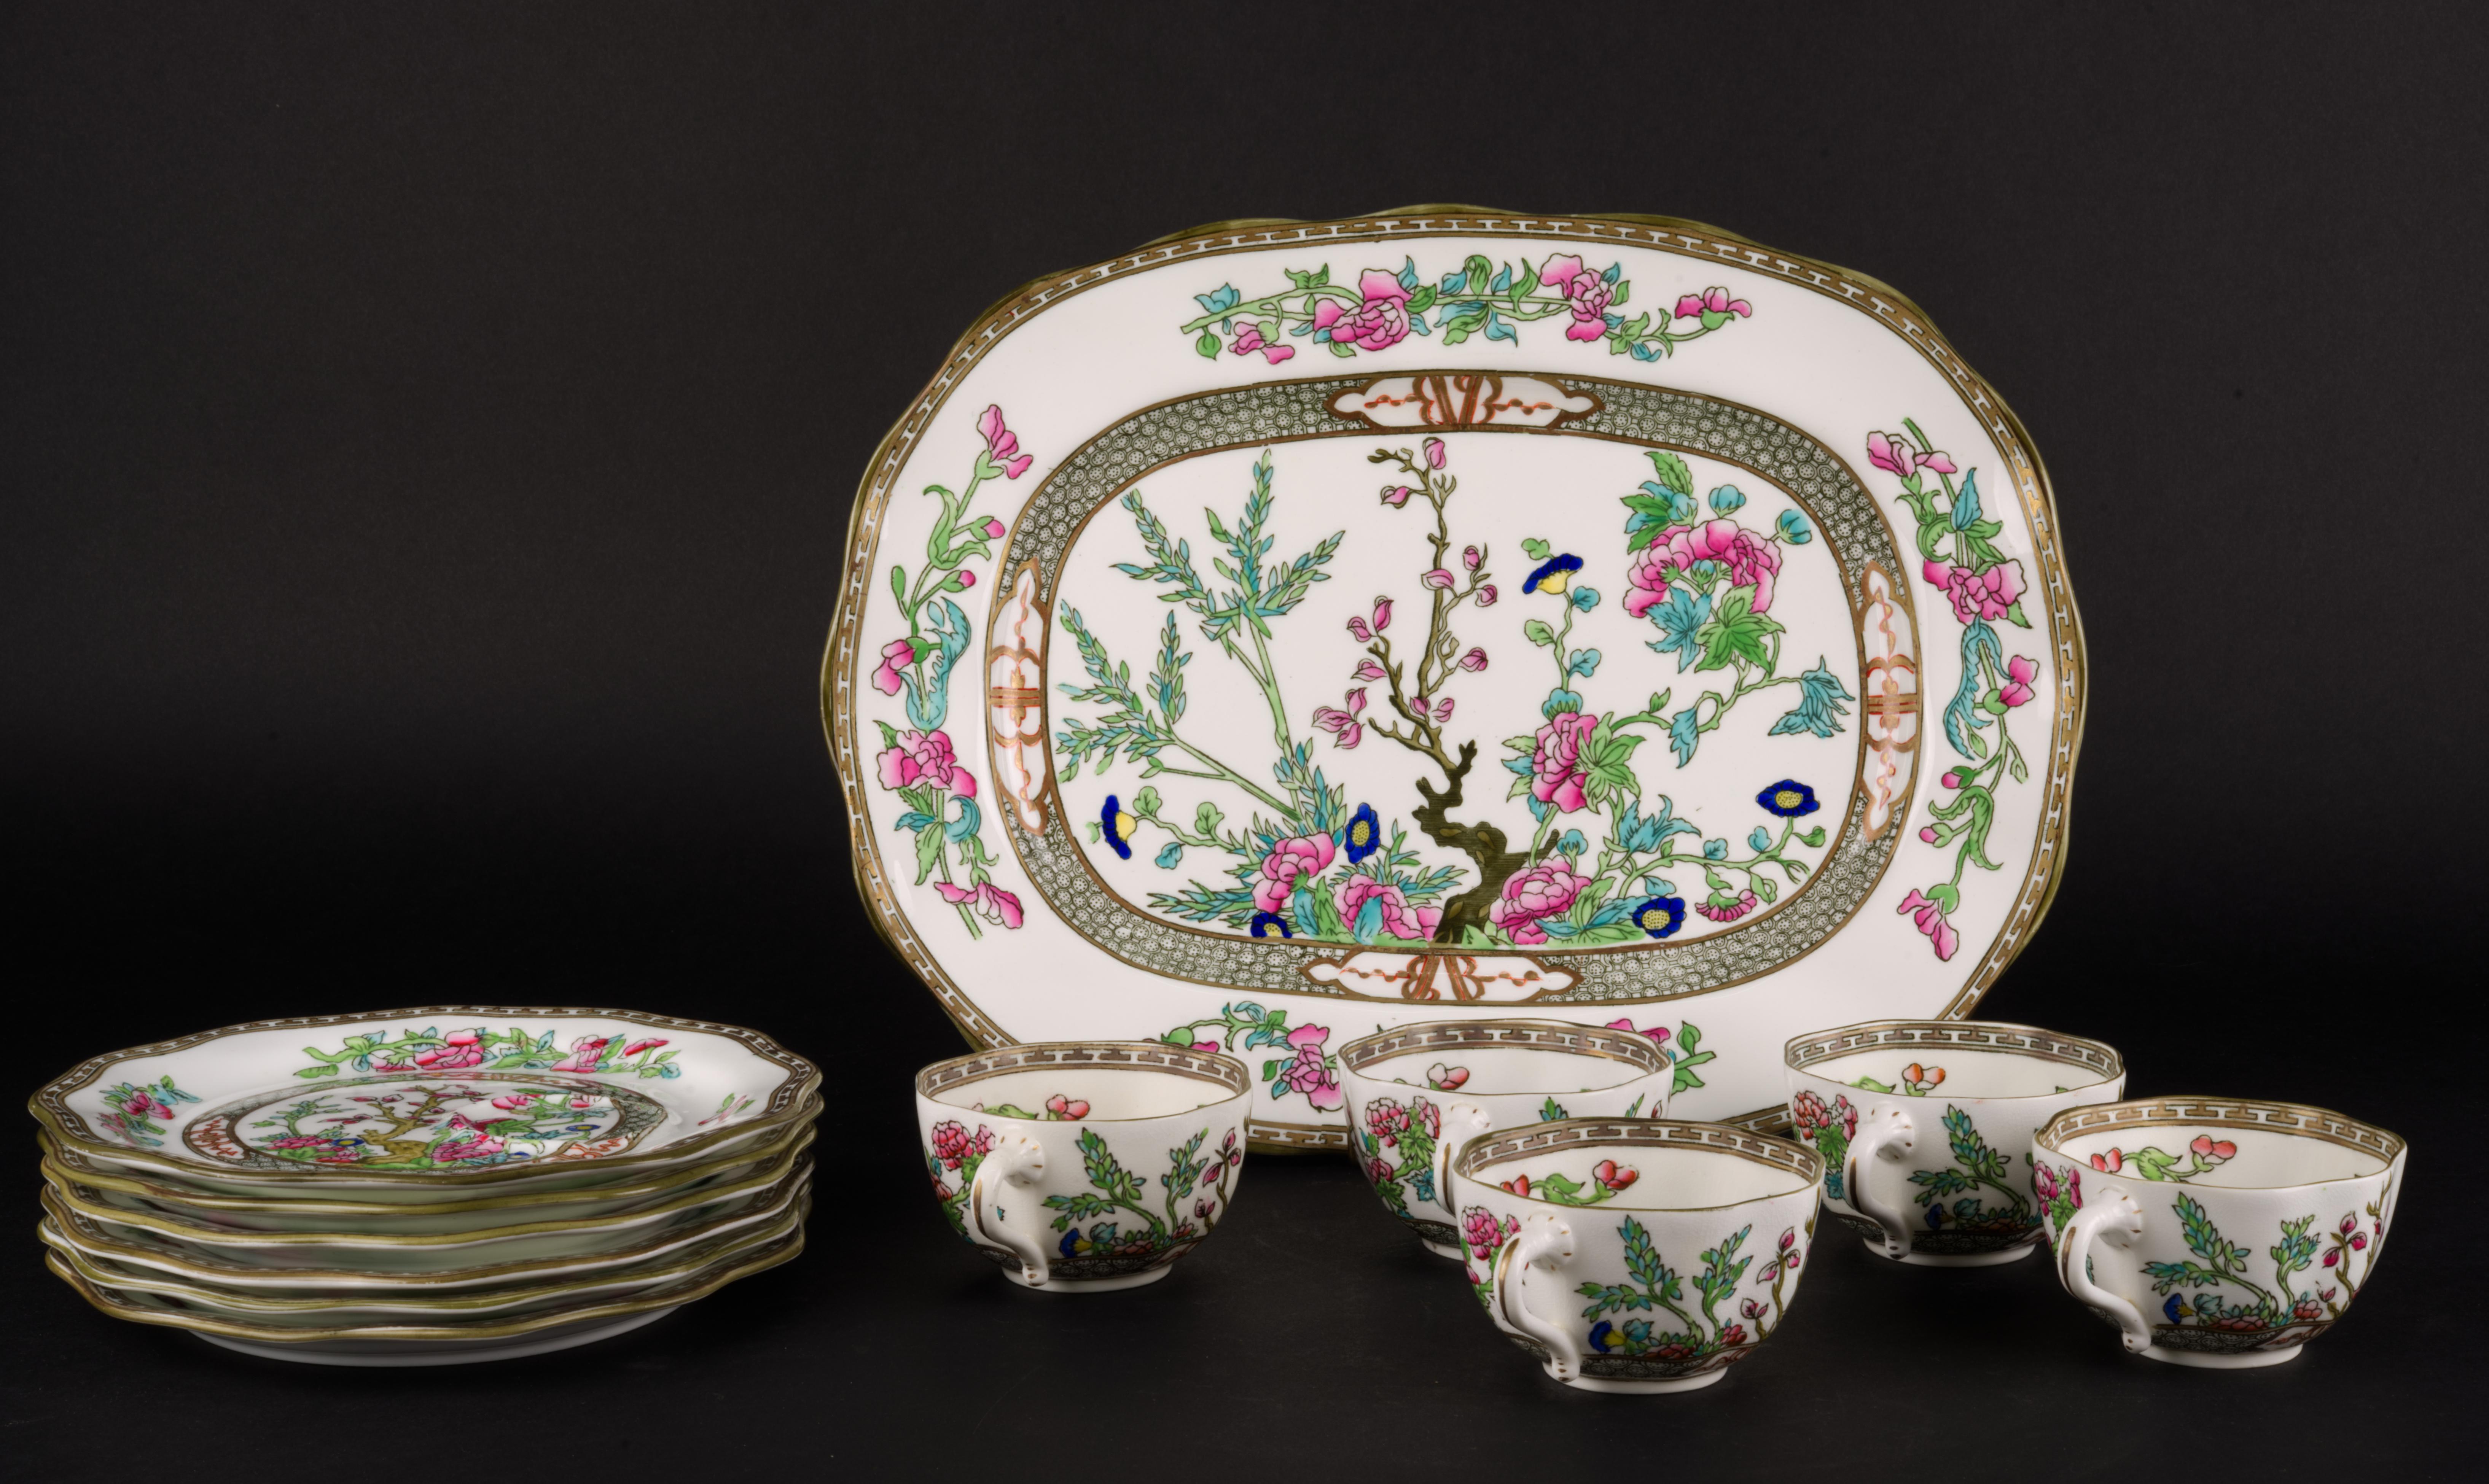 
Set of 5 dessert plates and cups and large rectangular serving or sandwich platter was made of fine porcelain by Coalport China Company in England. It is hand decorated with Indian Tree pattern; despite its name, Indian Tree pattern is based on